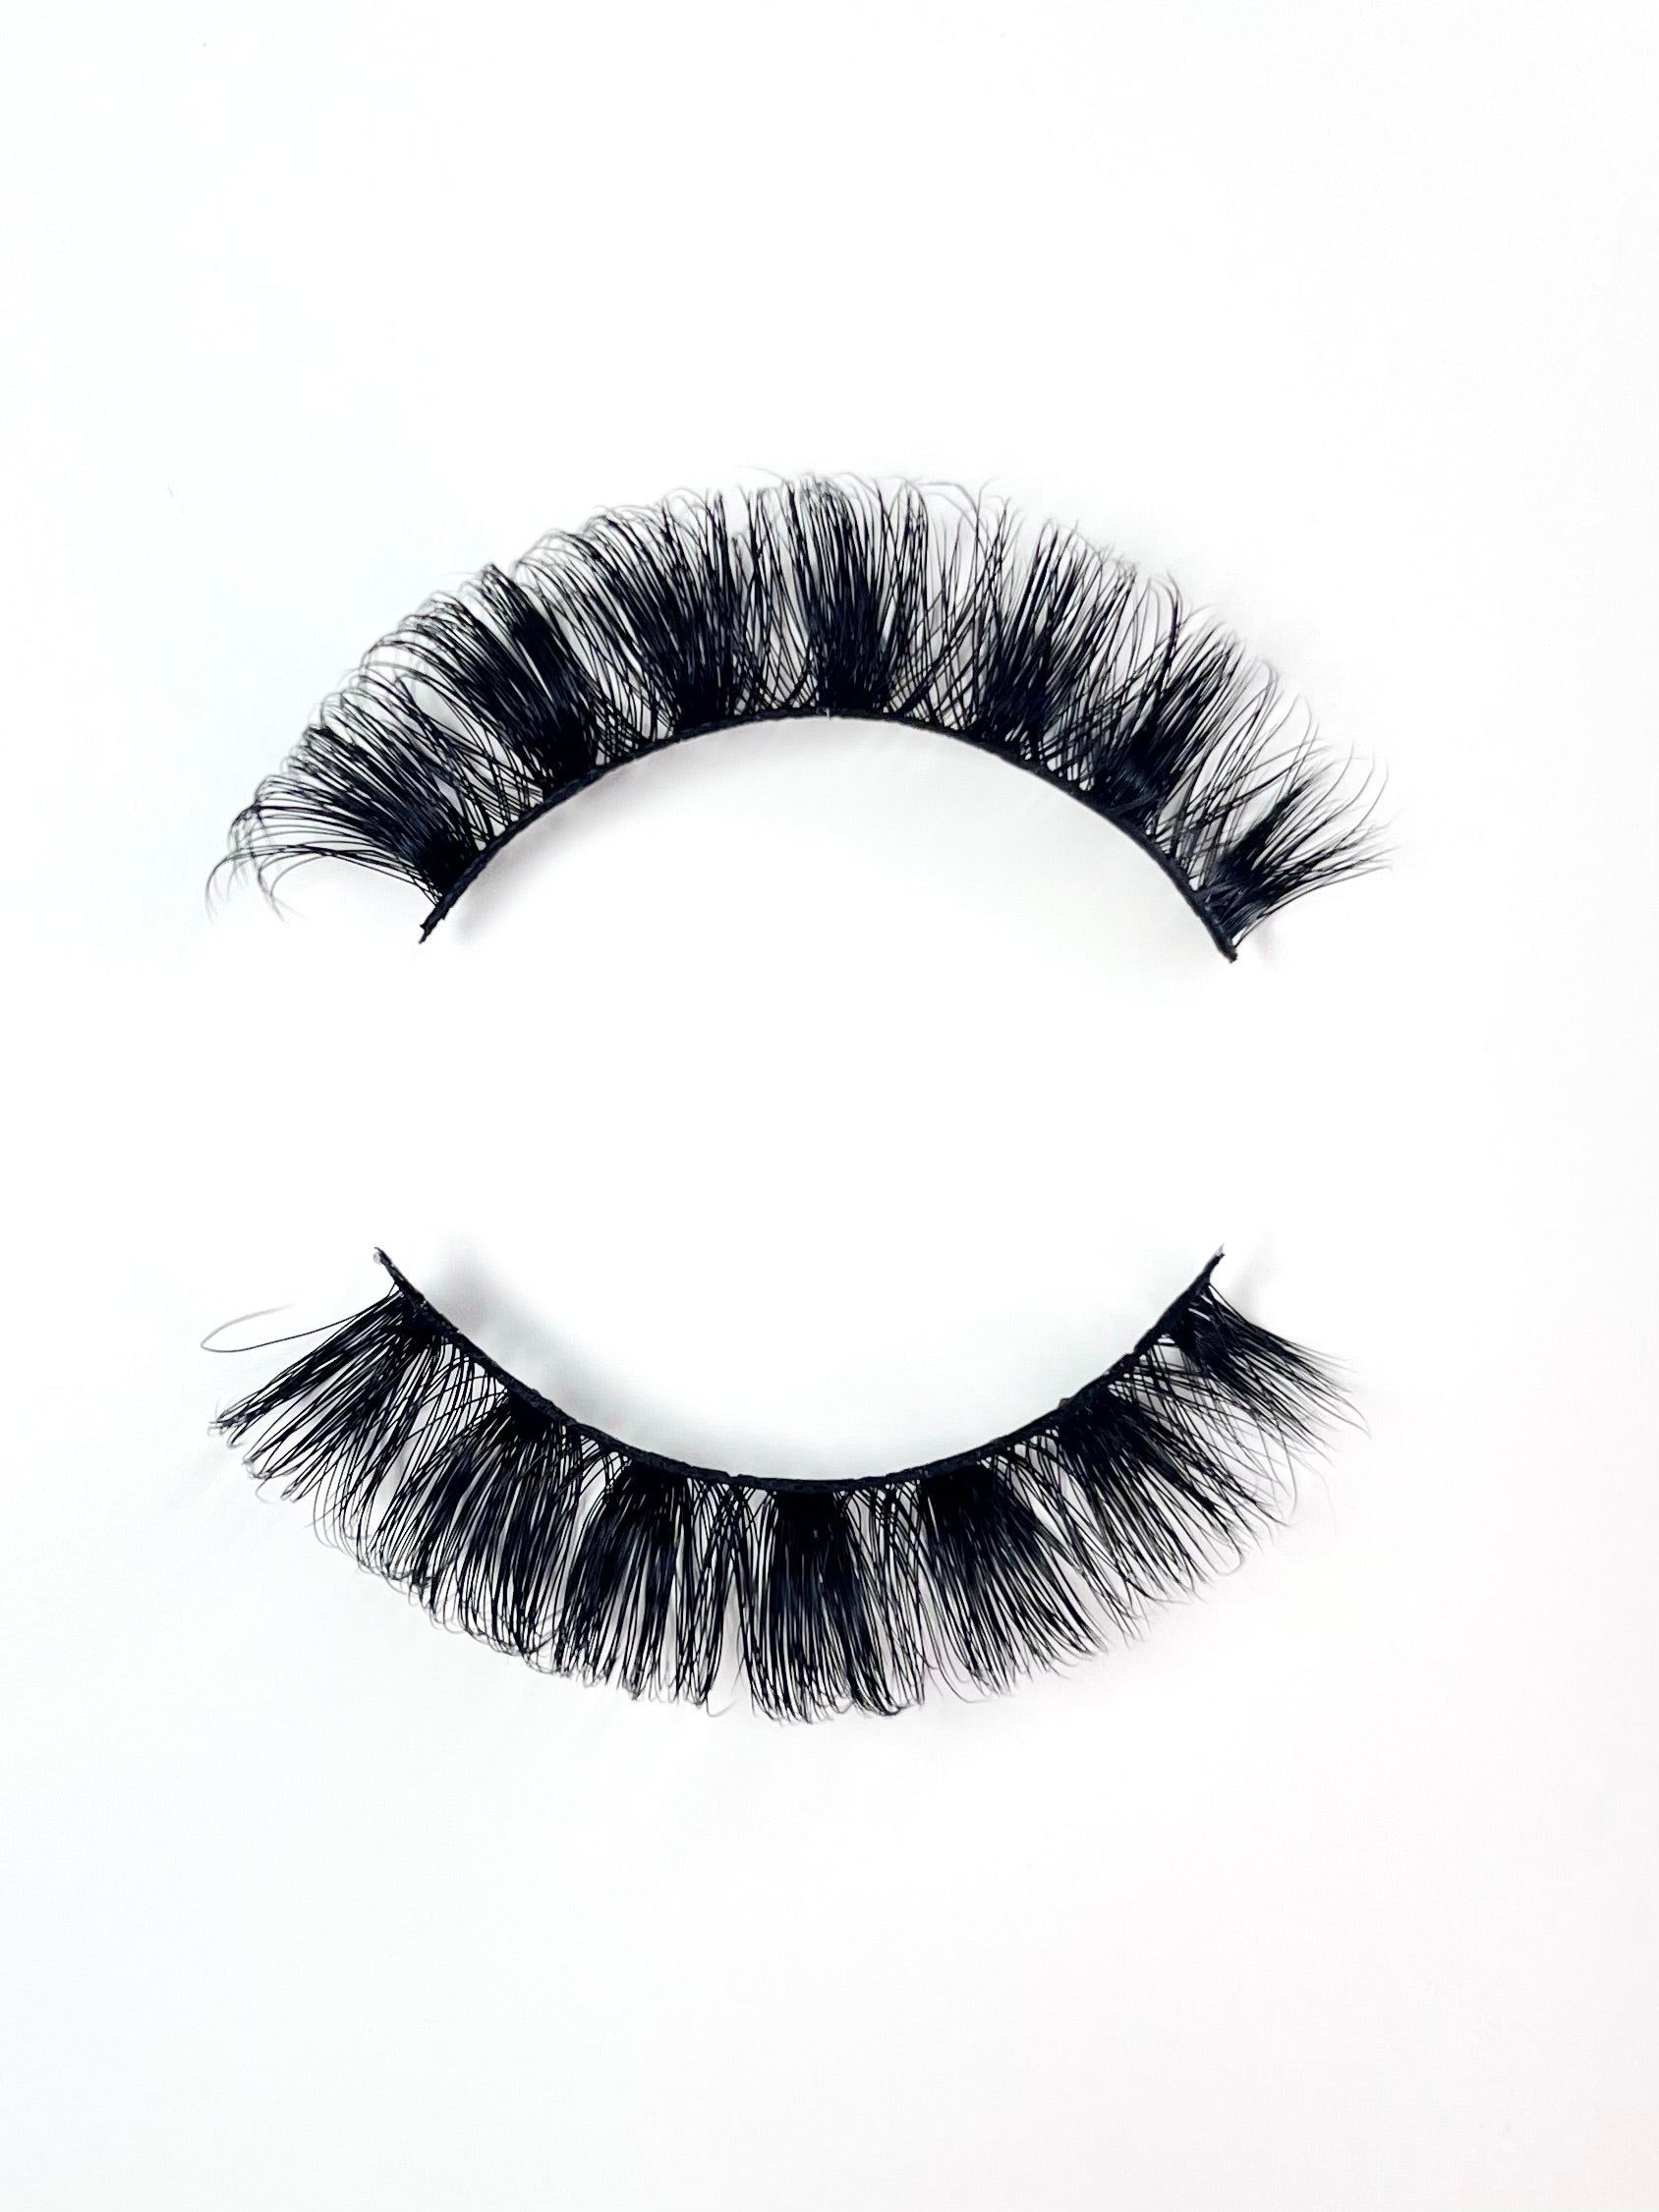 Ivy Sultry Lash Bar 